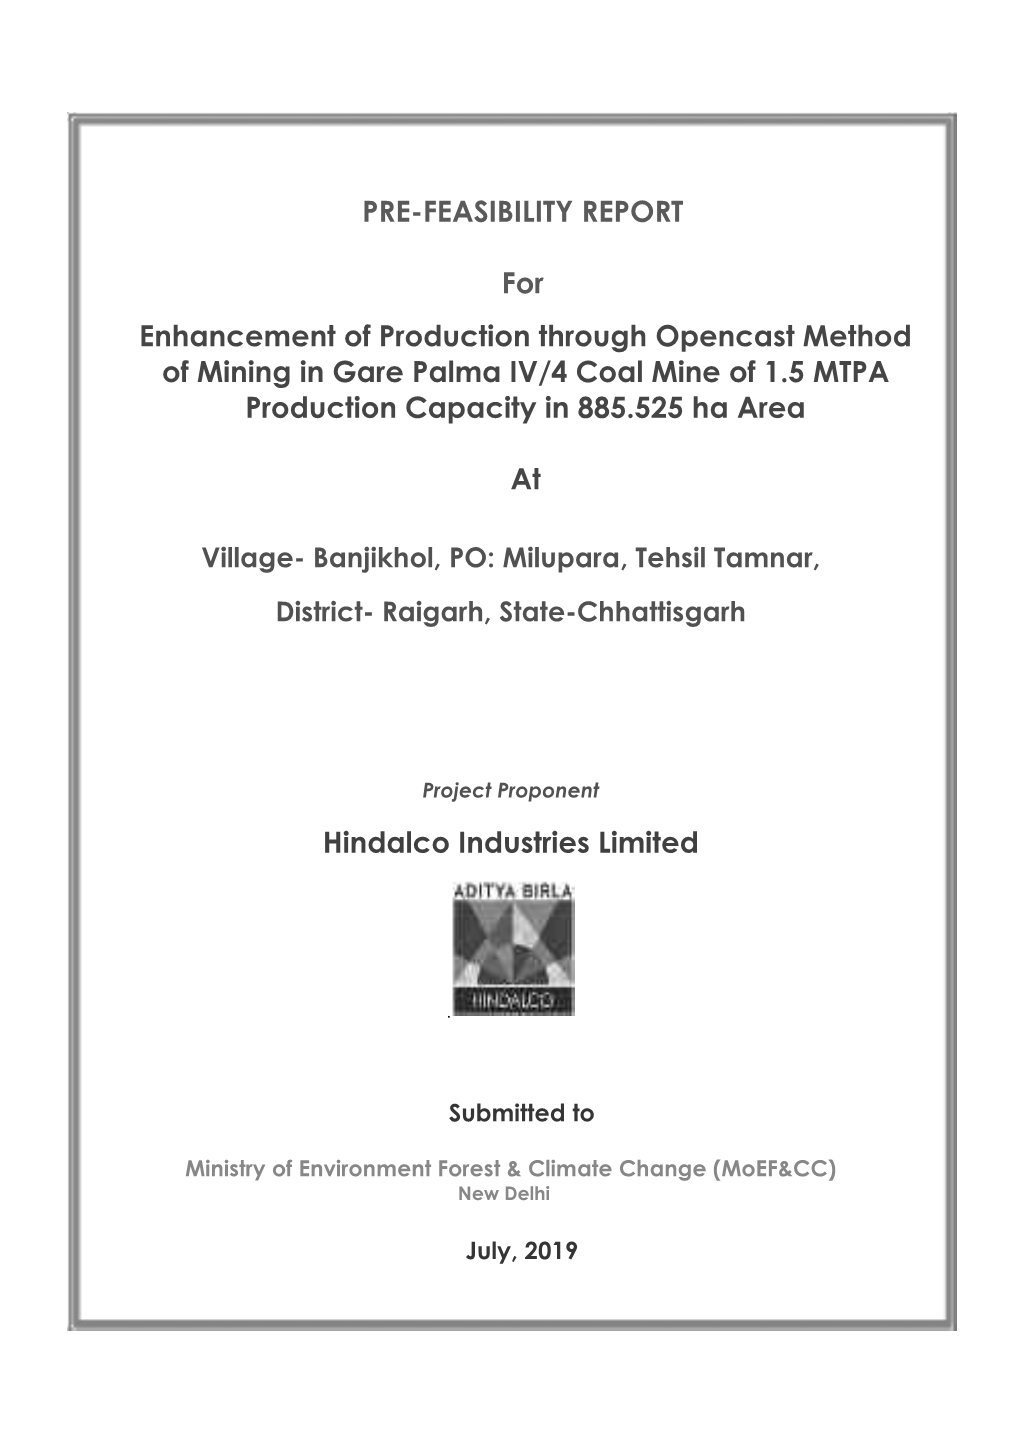 Pre-Feasibility Report for Enhancement of Production Through Opencast Method of Mining in Gare Palma IV/4 Coal Mine, Chhattisgarh